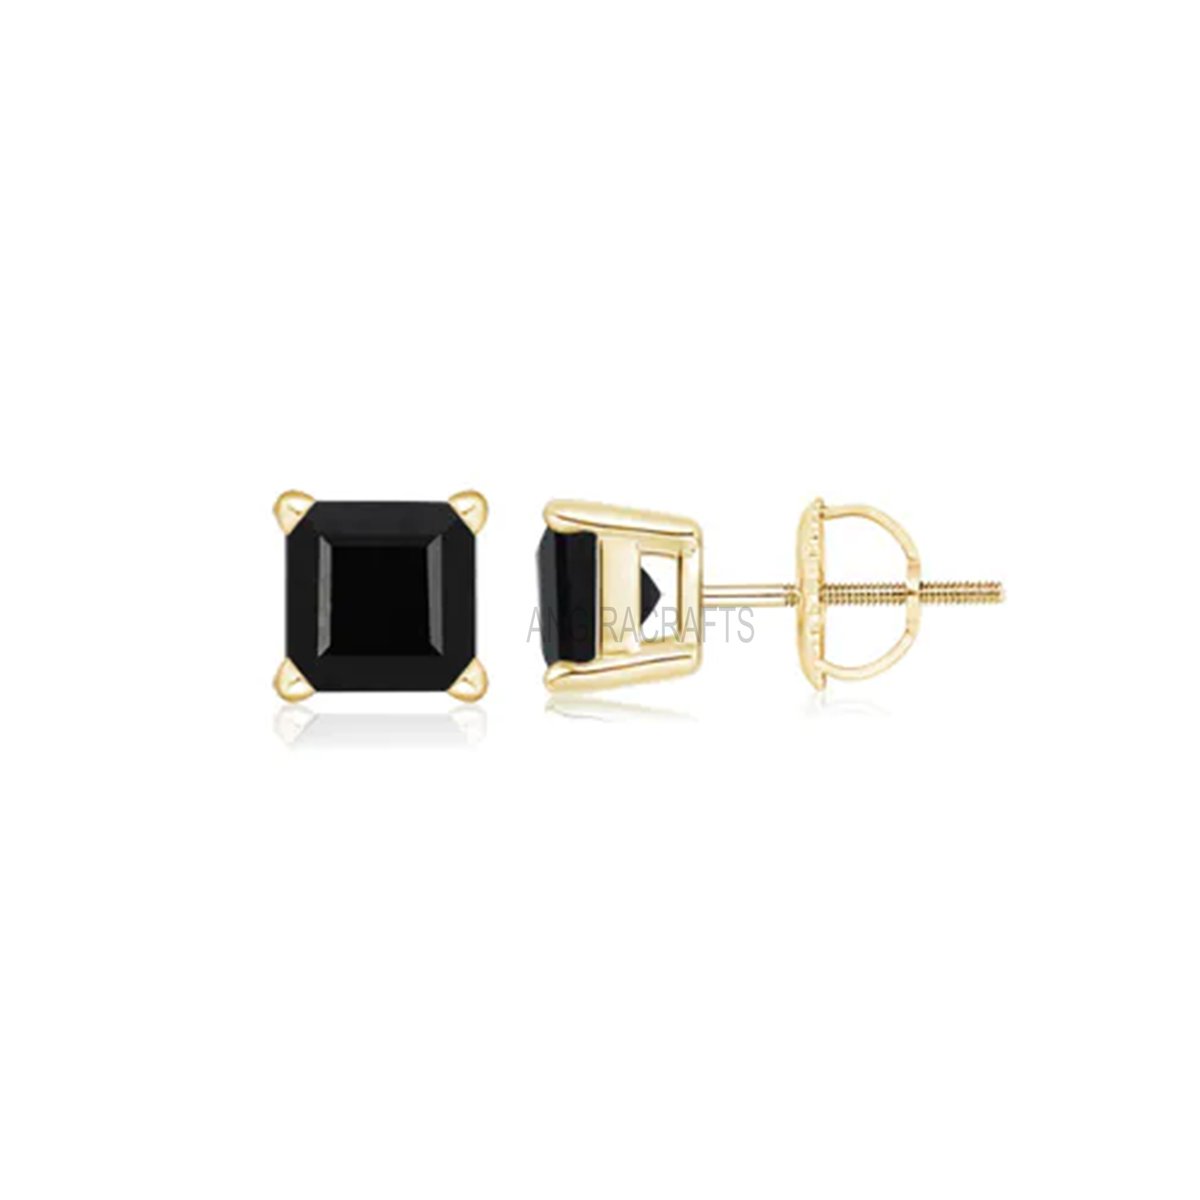 Yellow Gold Plating Handmade Sterling Silver Black Onyx Stud Earrings, Silver Black Onyx Stud, Black Onyx Square Stud Earrings Jewelry
#Blackonyxstud #studearring #Studearring #ThesellerWorld #handmadejewelry #Silverstudearring #Yellowgoldplated #Jewelry